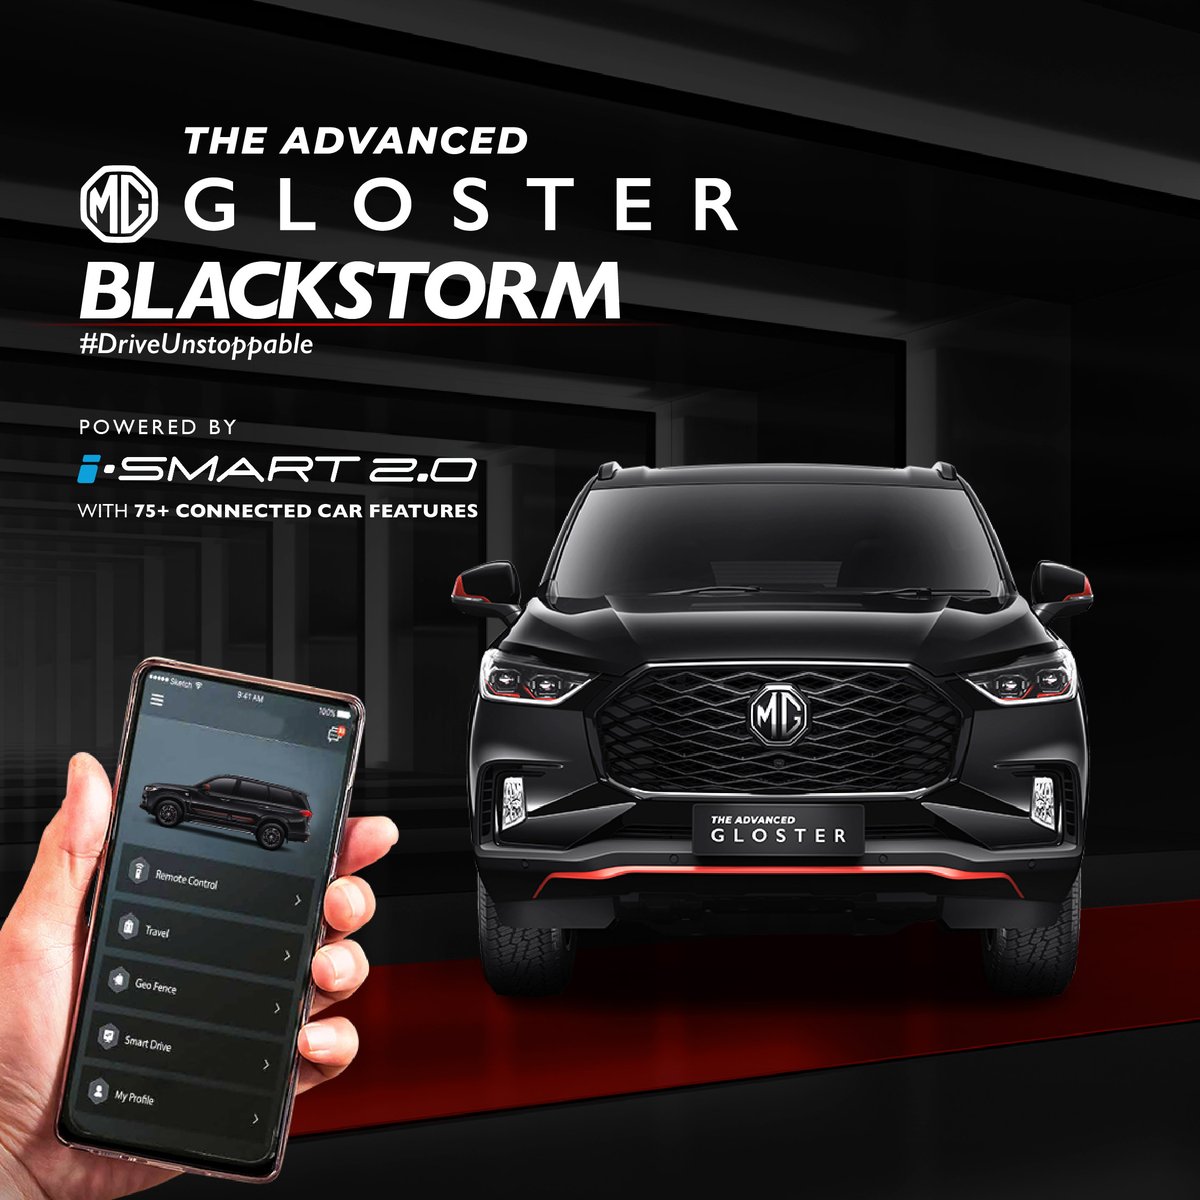 The #AdvancedGloster #BlackStorm is powered by i-SMART 2.0 – a network of intuitive, intelligent, & futuristic technology with 75+ connected features. These cumulatively take the Gloster’s technological benchmarks a notch higher.
#DriveUnstoppable #AdvancedGloster #MGMotor  #SUV